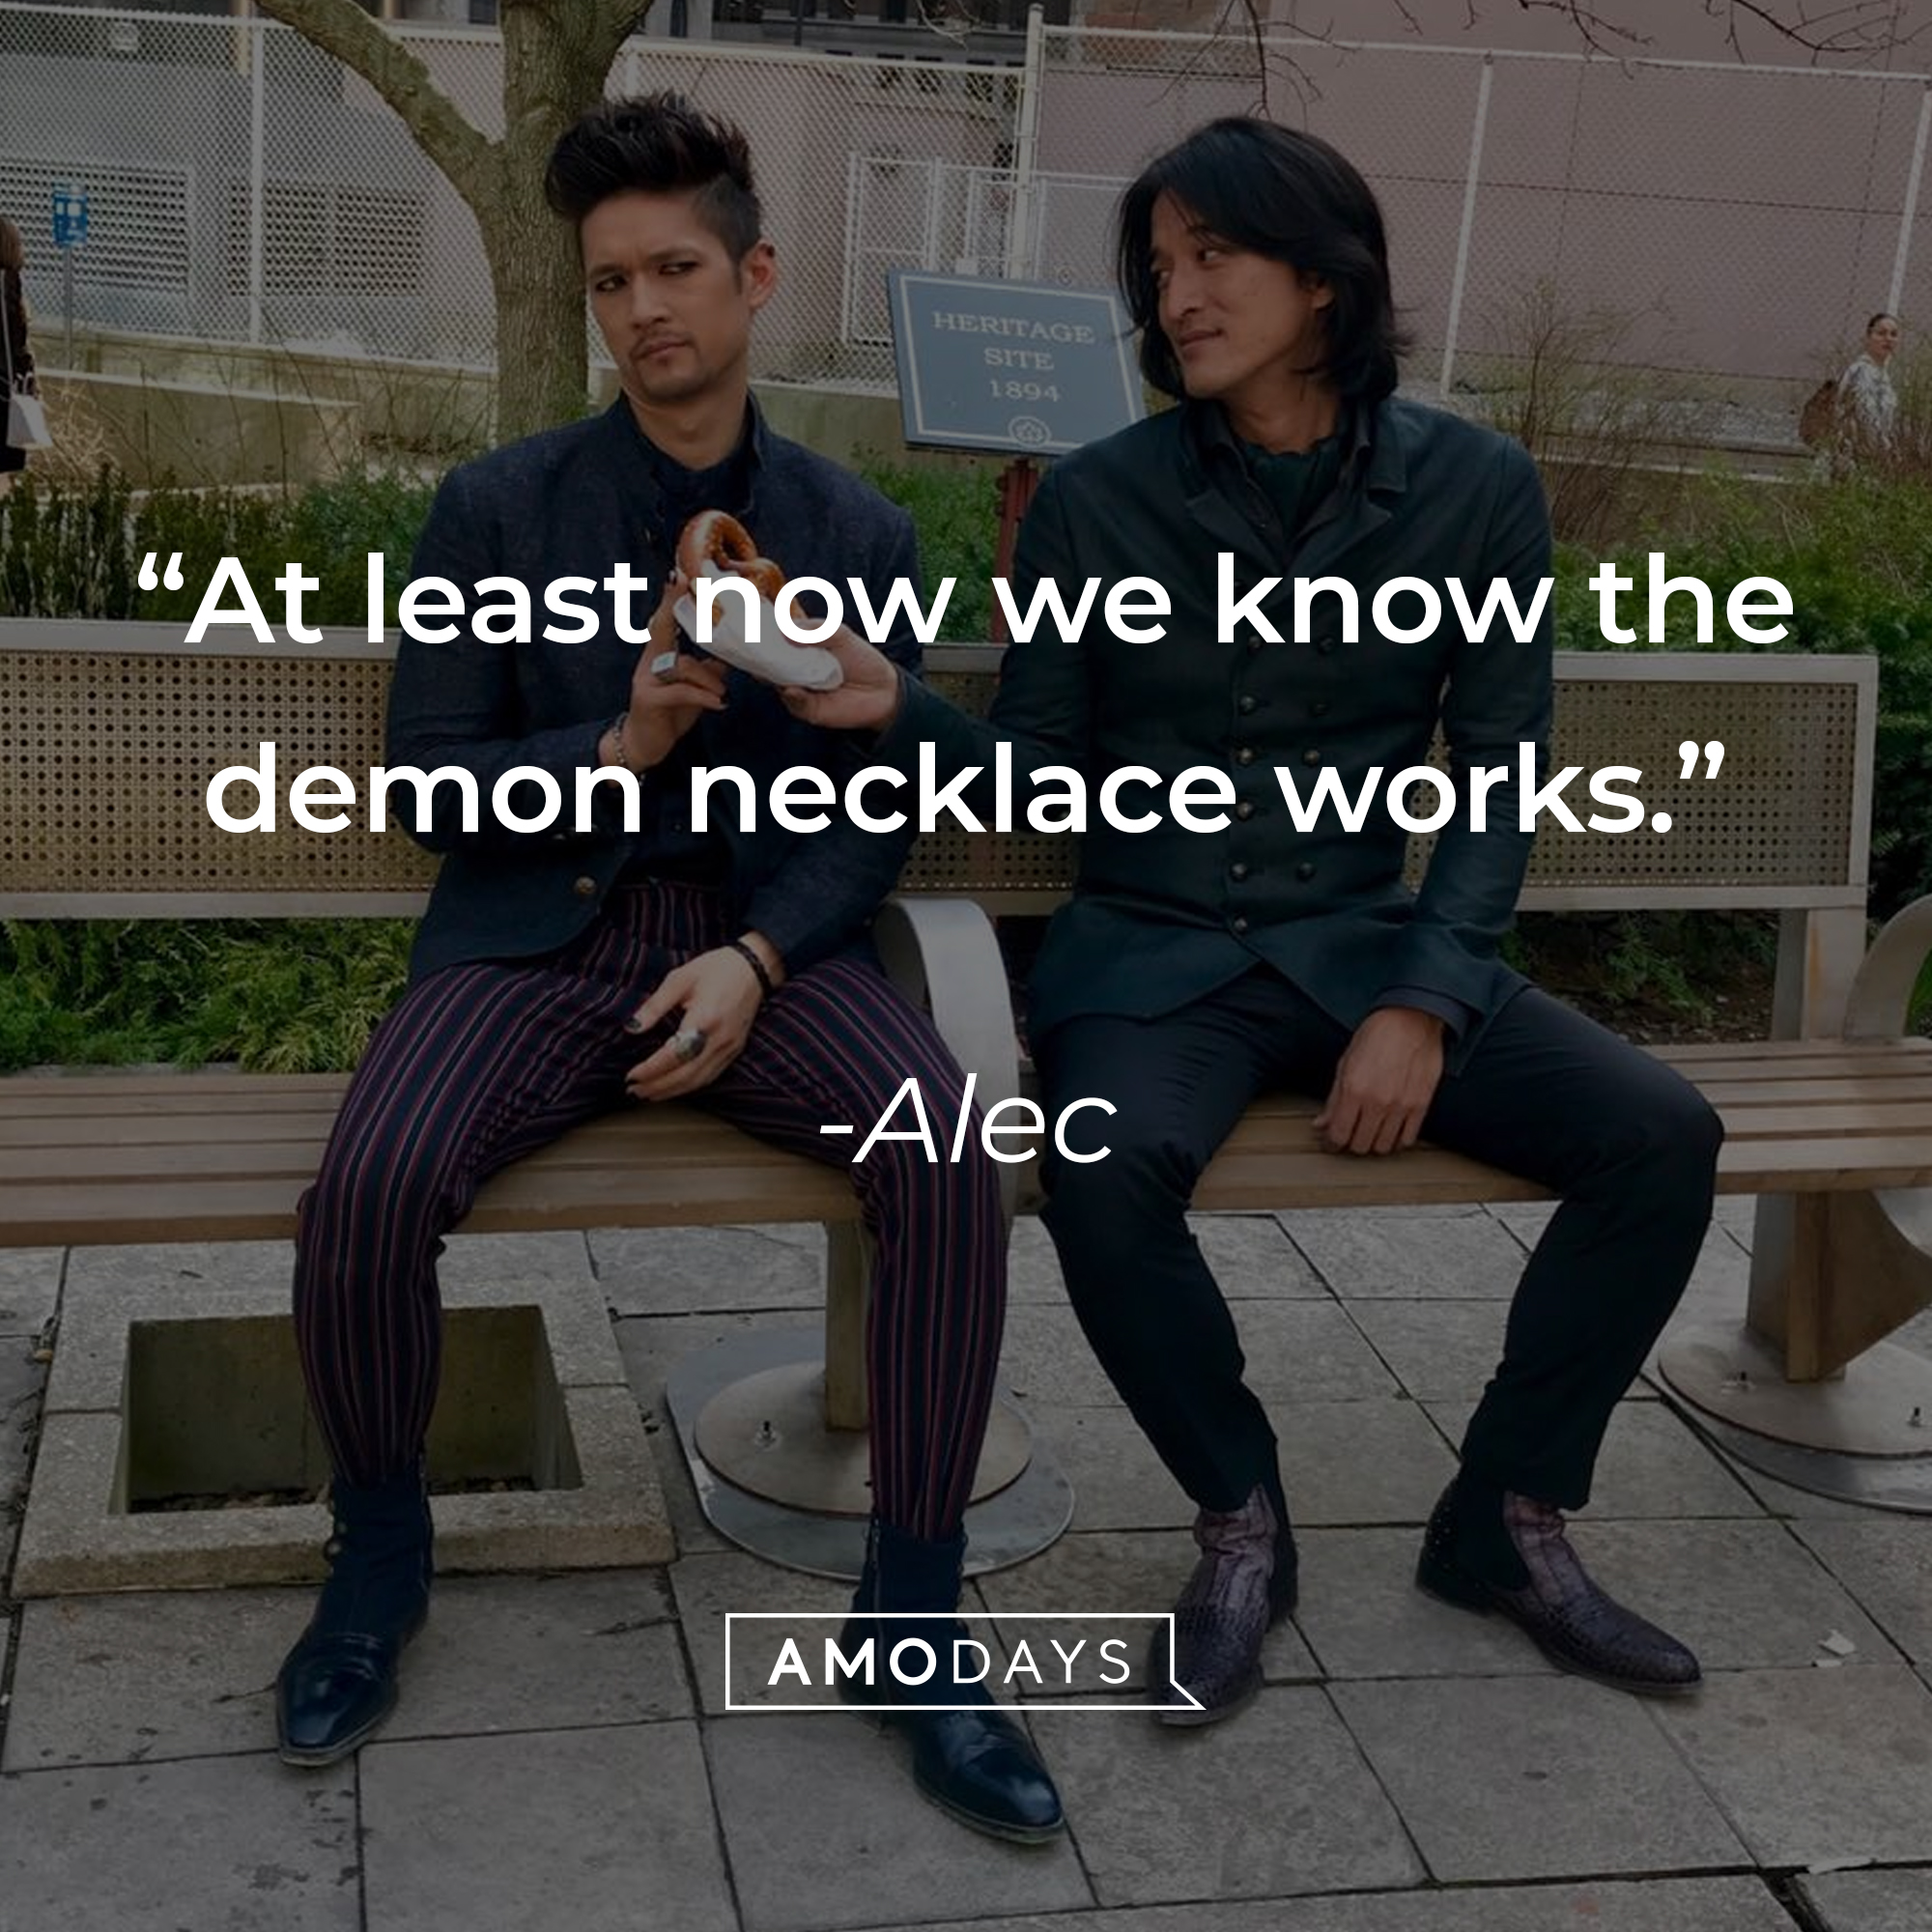 Alec's quote: "At least now we know the demon necklace works."┃Source: facebook.com/ShadowhuntersSeries